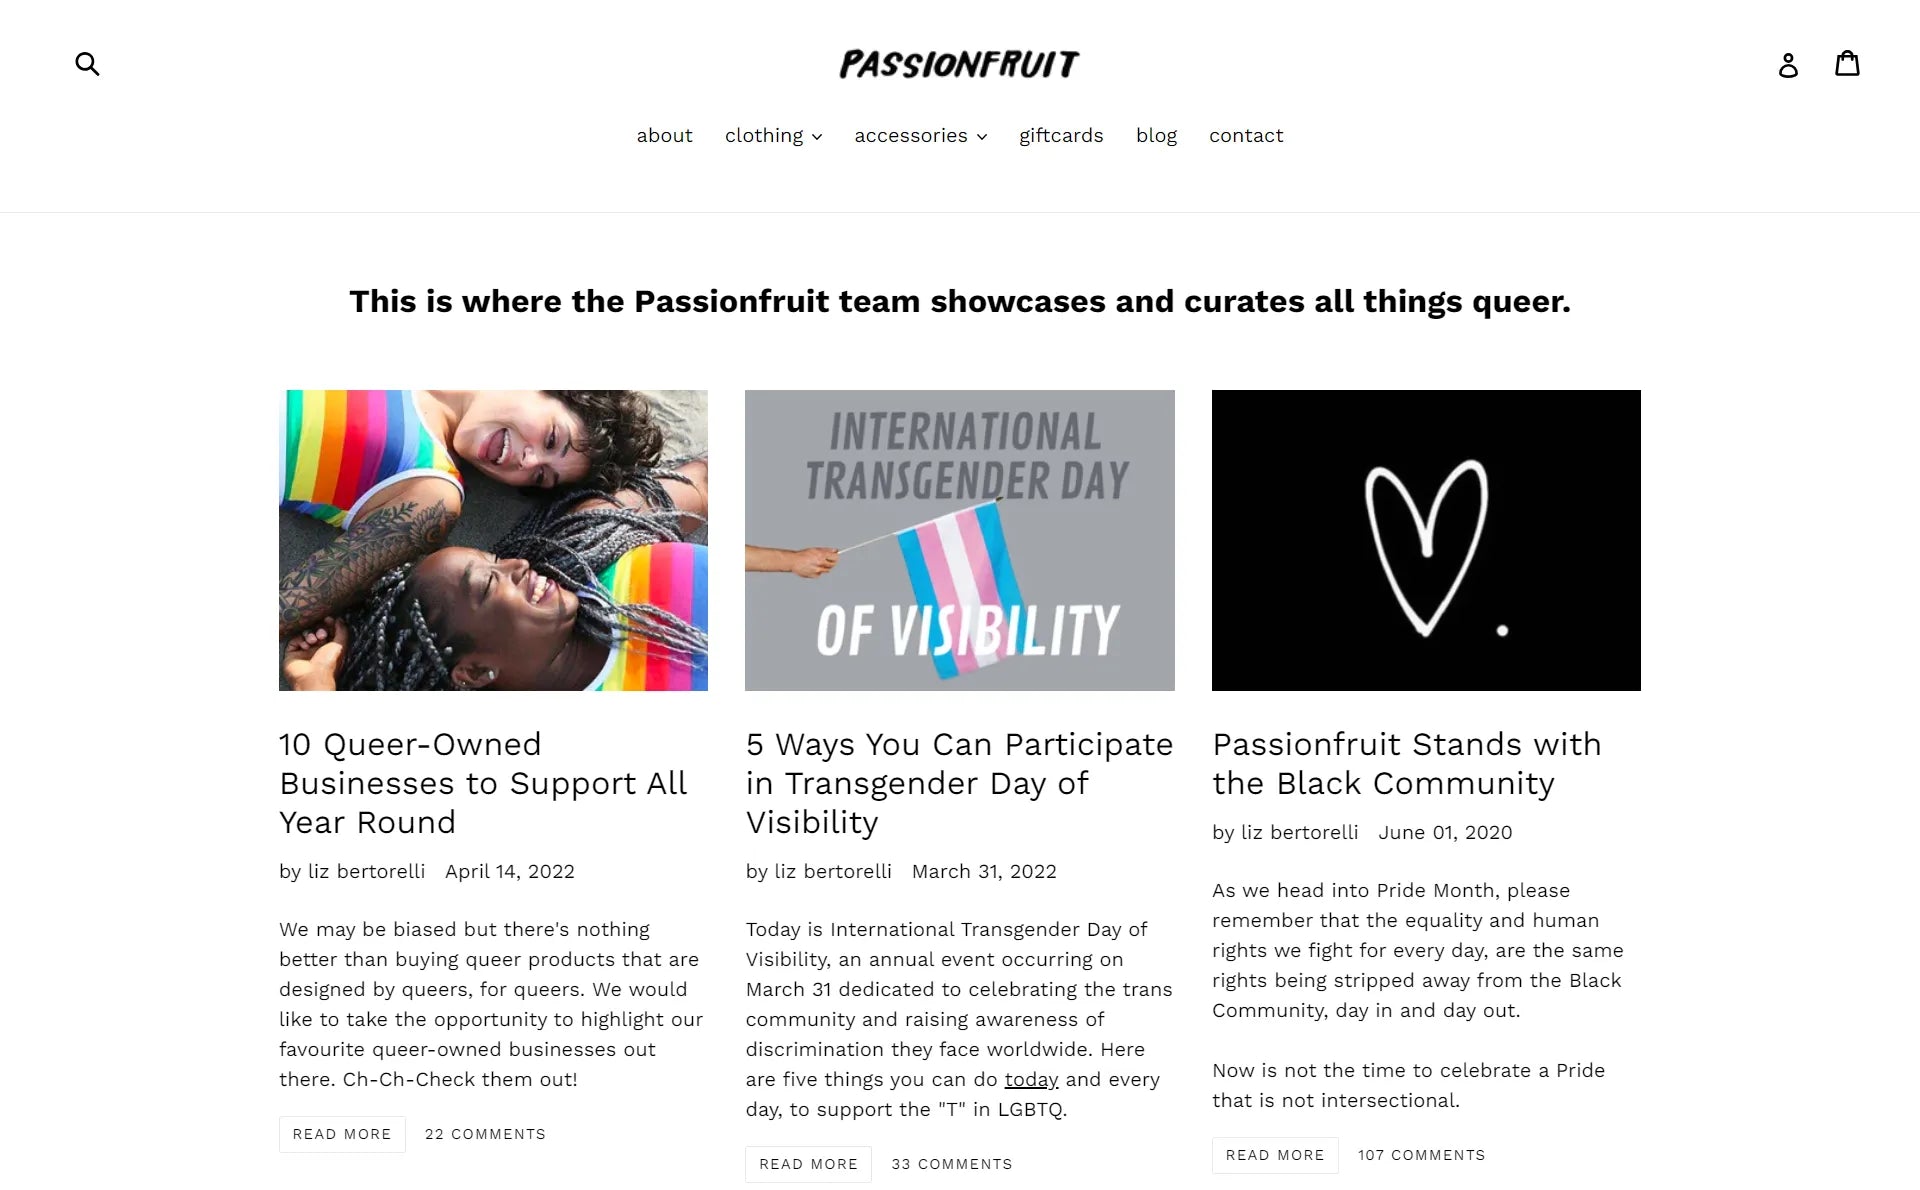 Screenshot of passionfruit’s blog page.